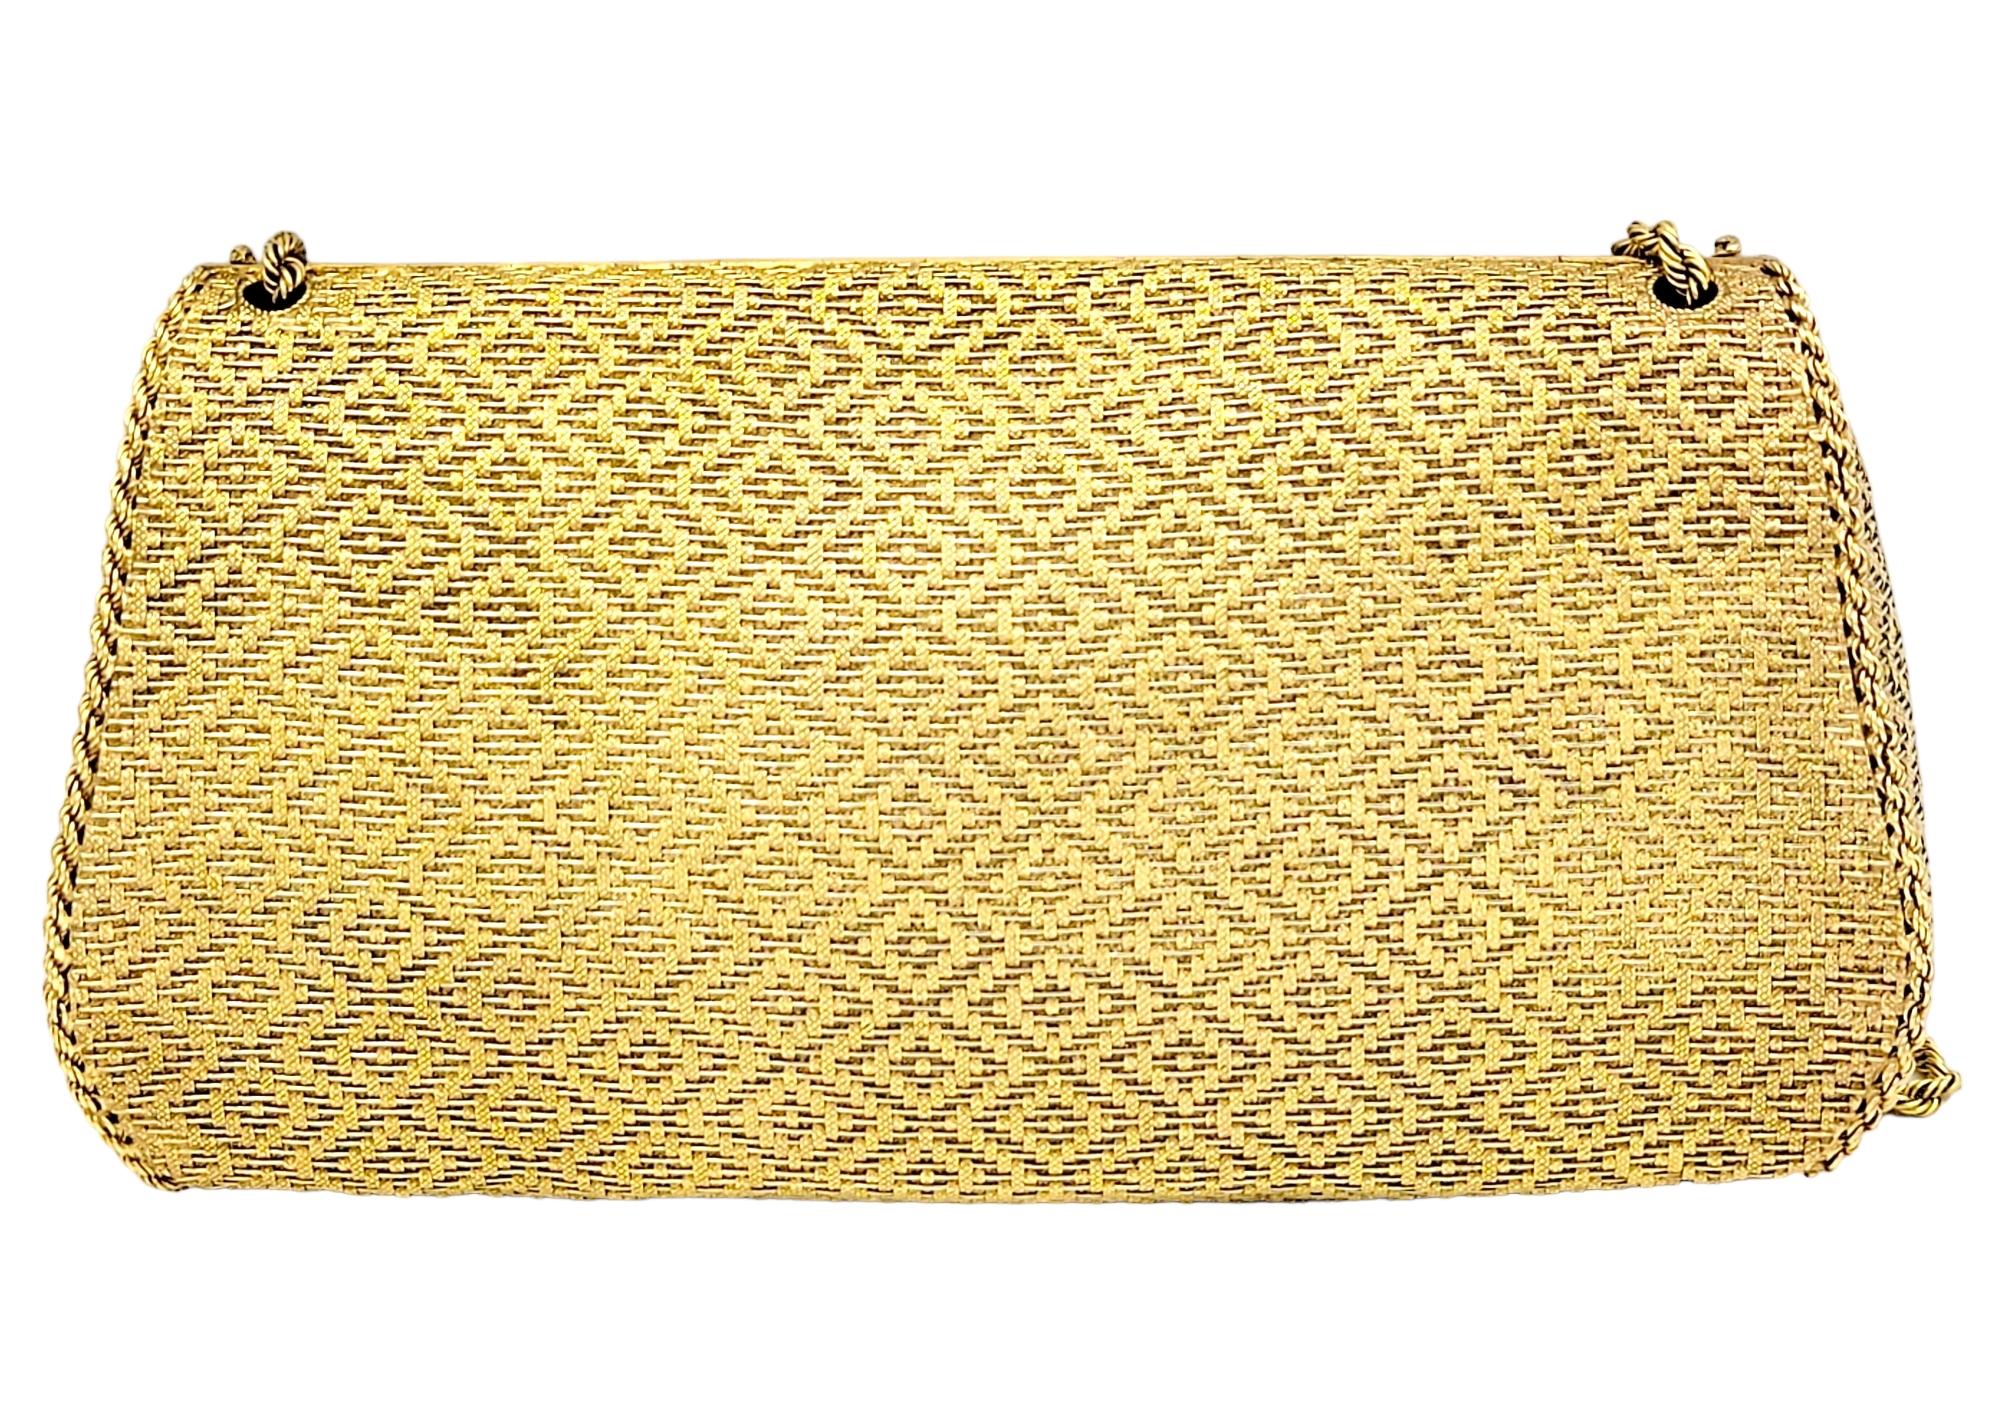 Exquisite 18 karat yellow gold evening purse. This gorgeous and unique bag is composed of delicate woven 18 karat yellow gold arranged in a subtle diamond shaped zigzag pattern. There are .40 carats of pave white diamonds embellished on the 2